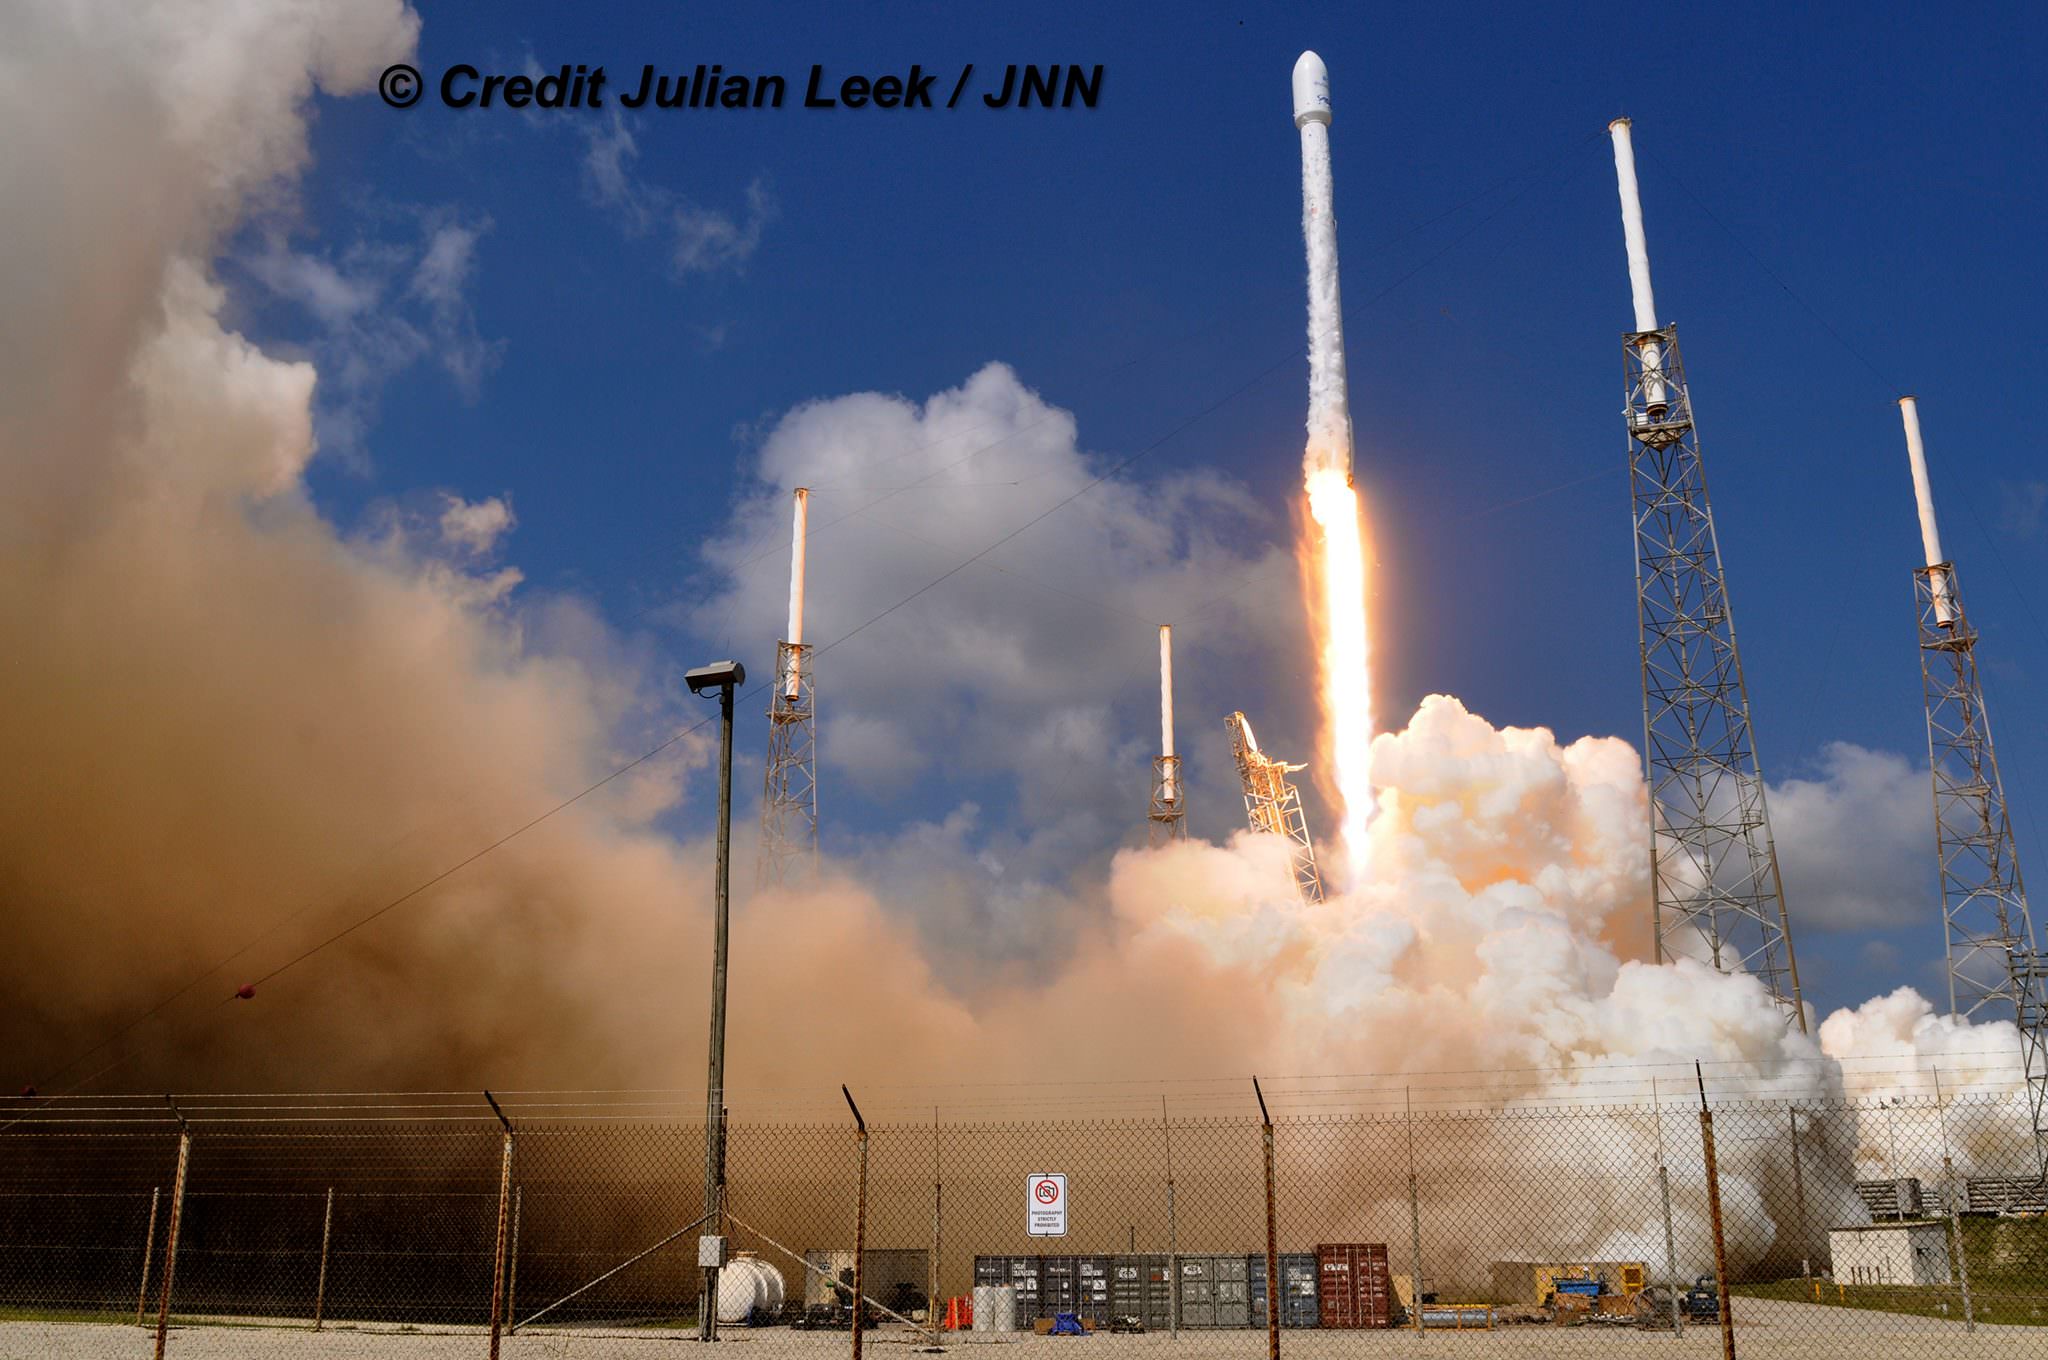 Launch of SpaceX Falcon 9 with Eutelsat/ABS 2A on June 15, 2016 from Cape Canaveral Air Force Station, Fl.   Credit: Julian Leek 